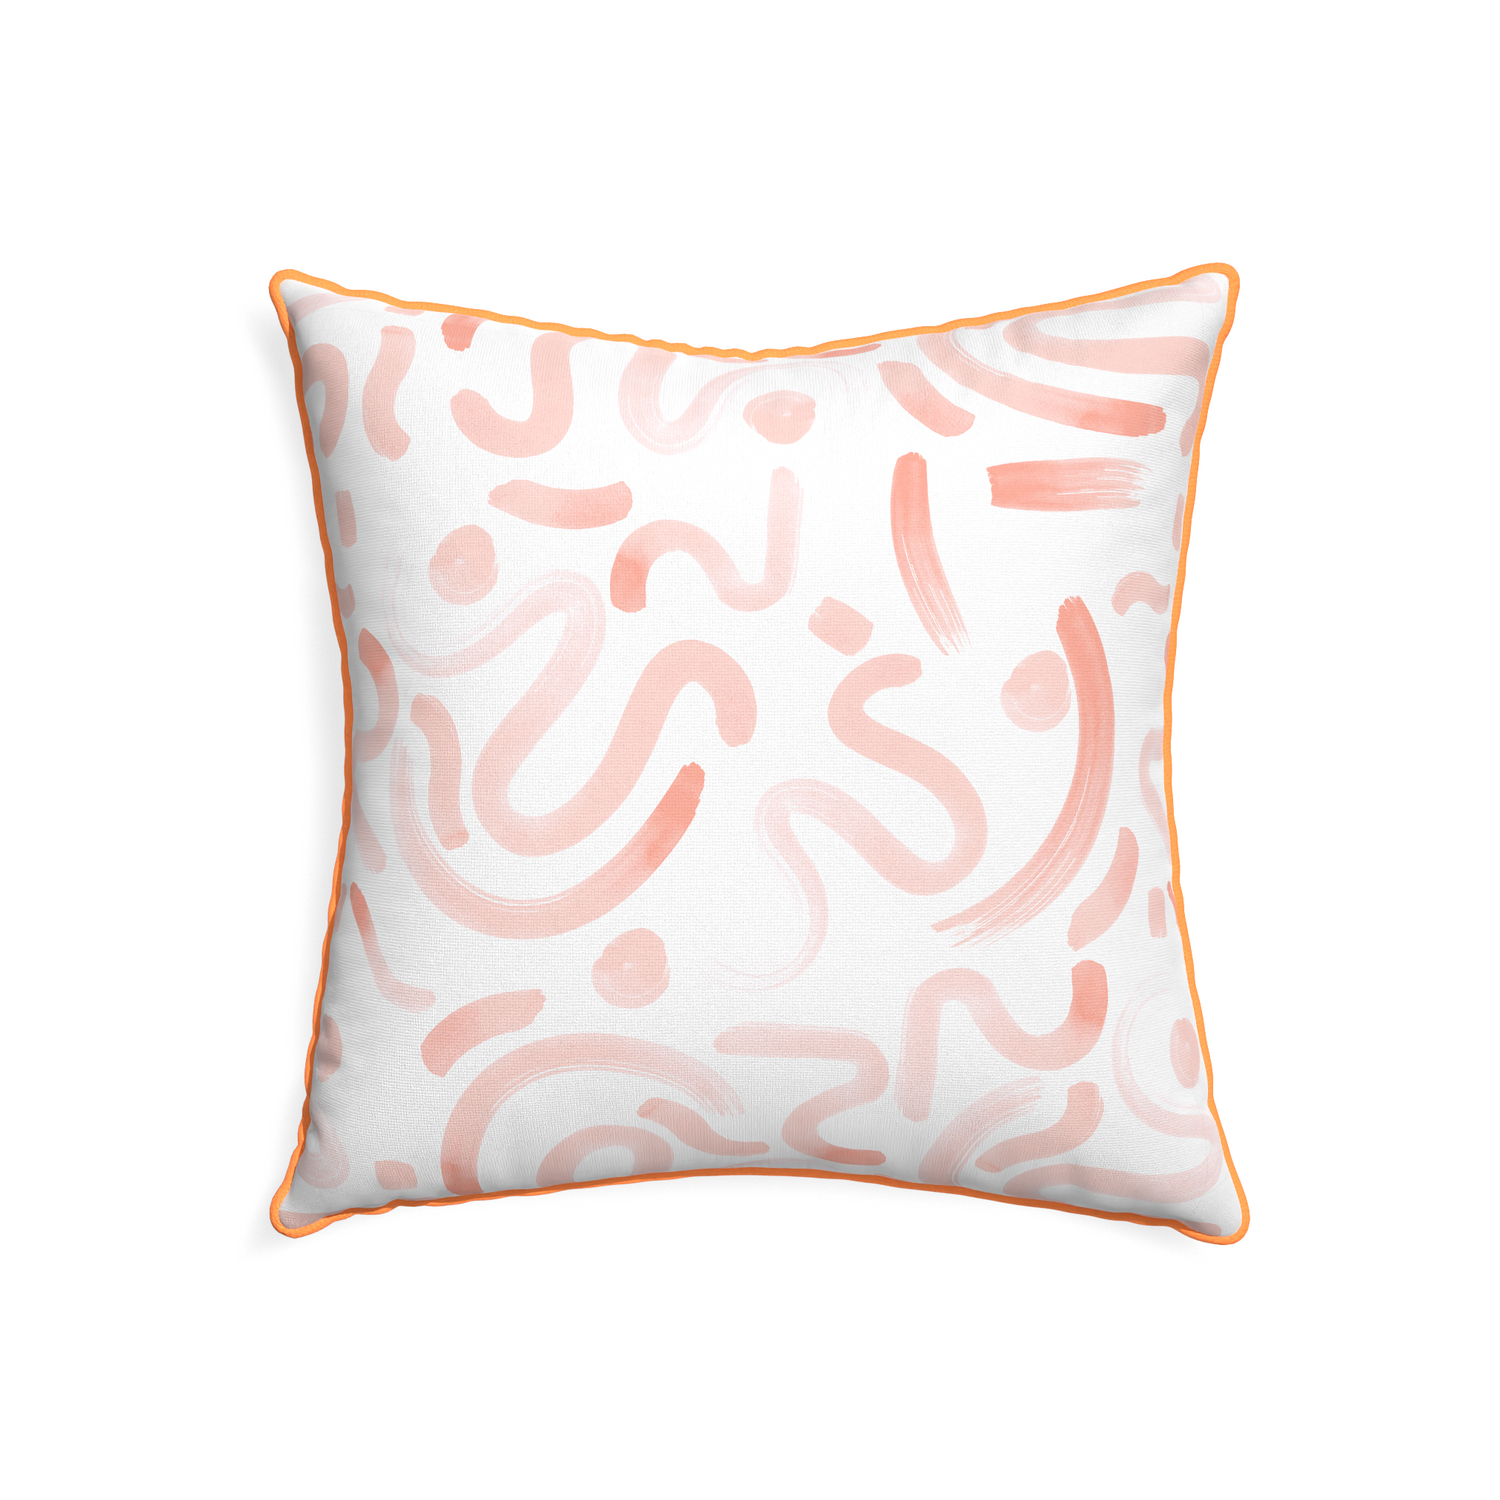 22-square hockney pink custom pillow with clementine piping on white background